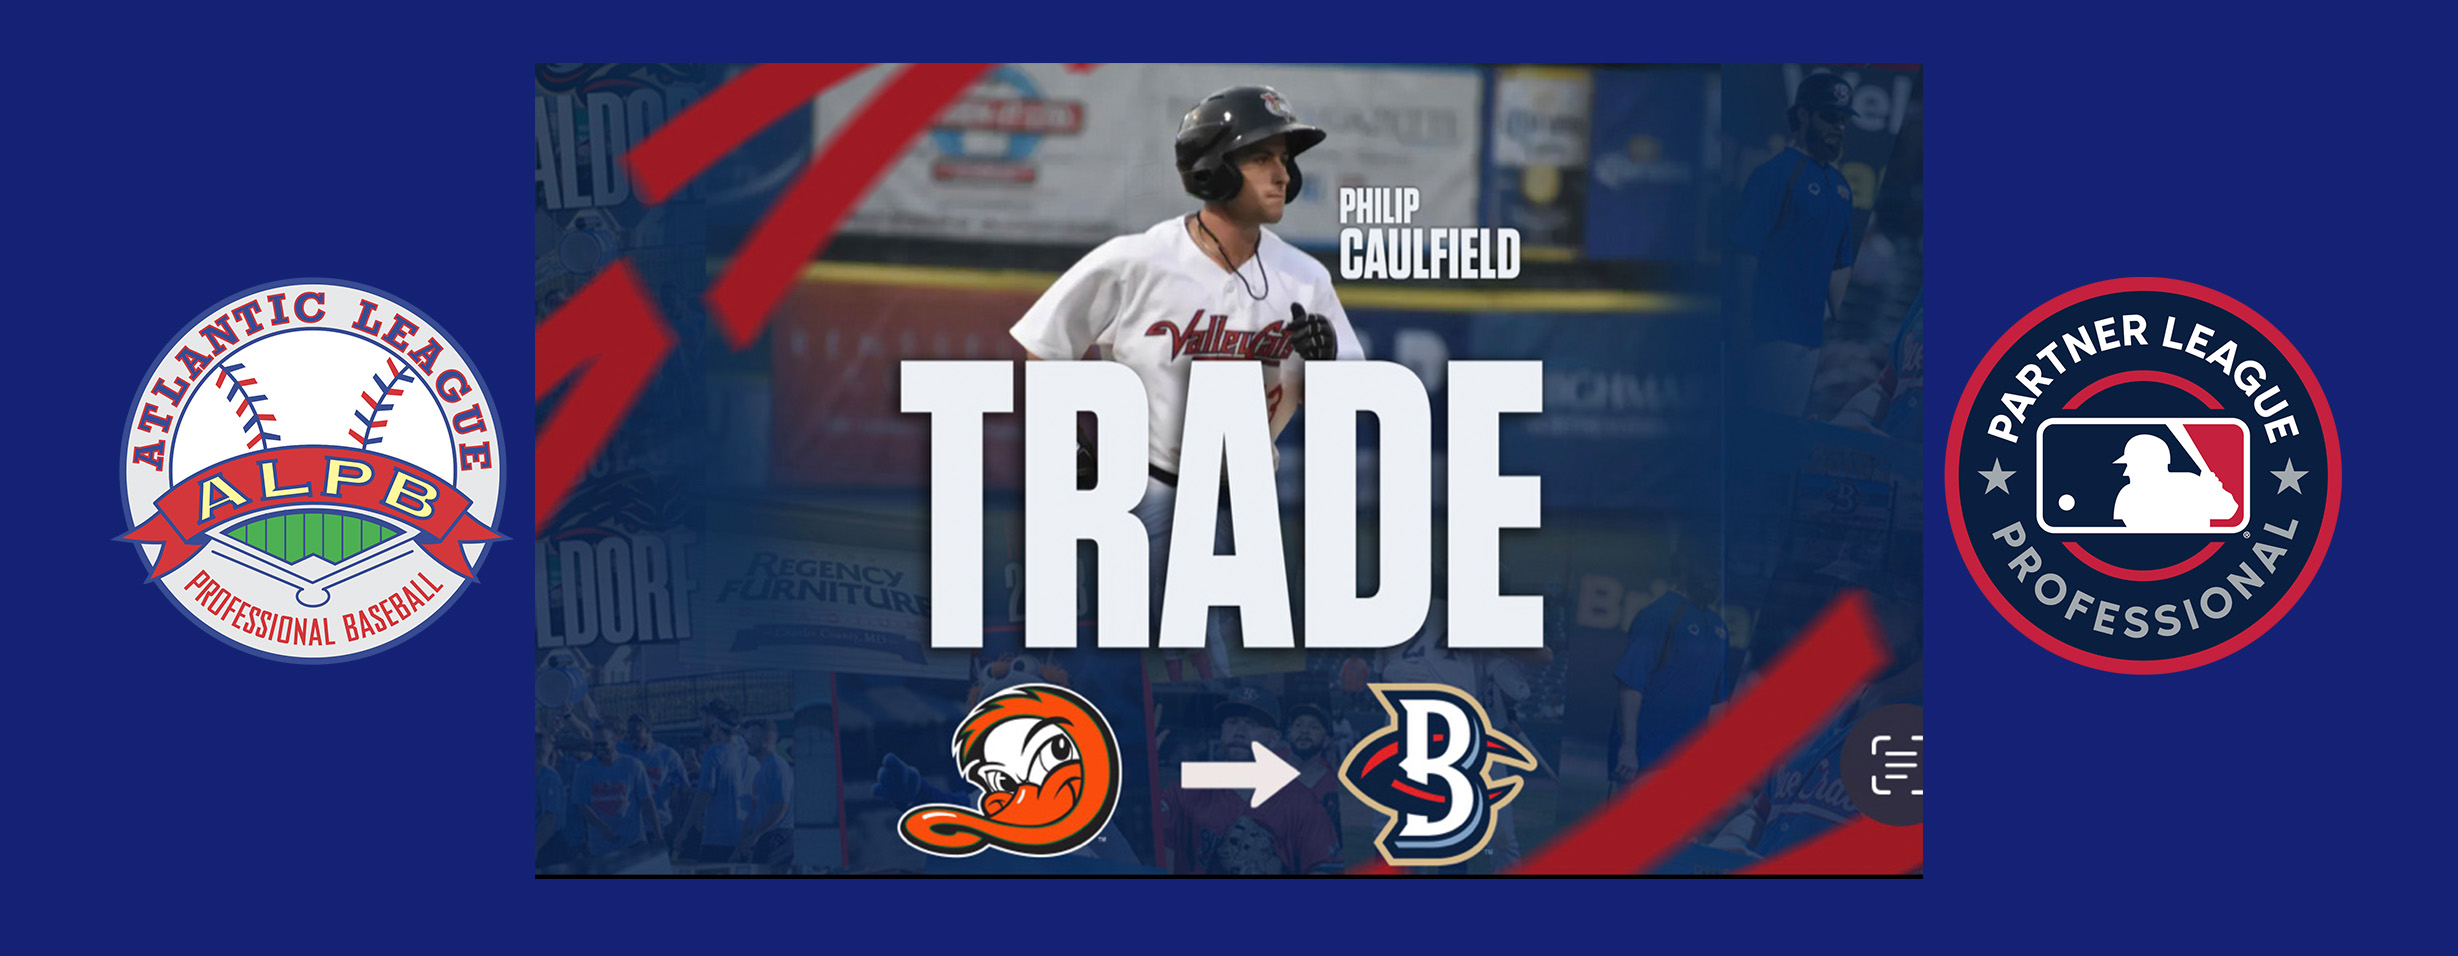 Blue Crabs acquire Caulfield from Ducks